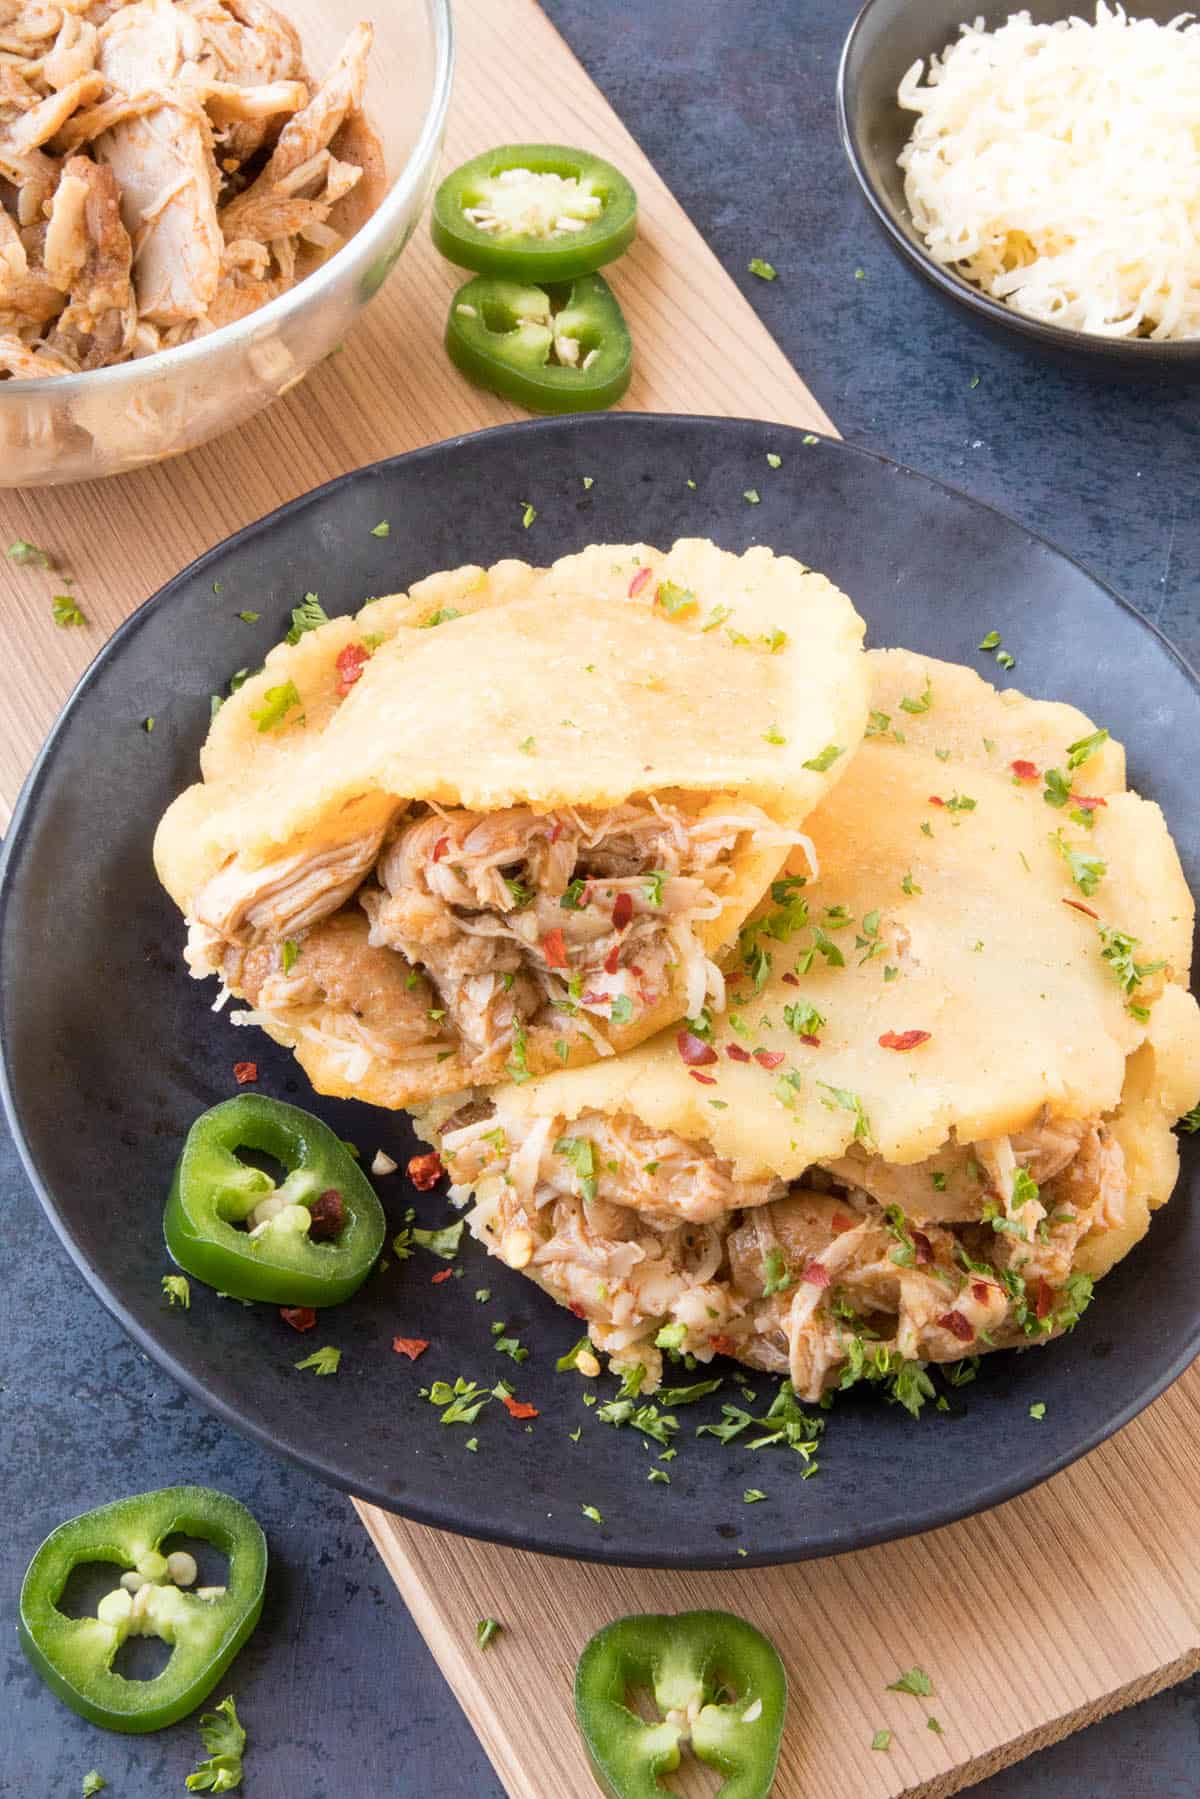 Pulled Chicken Gorditas Recipe - Stuffed with Delicious Pulled Chicken and read to eat